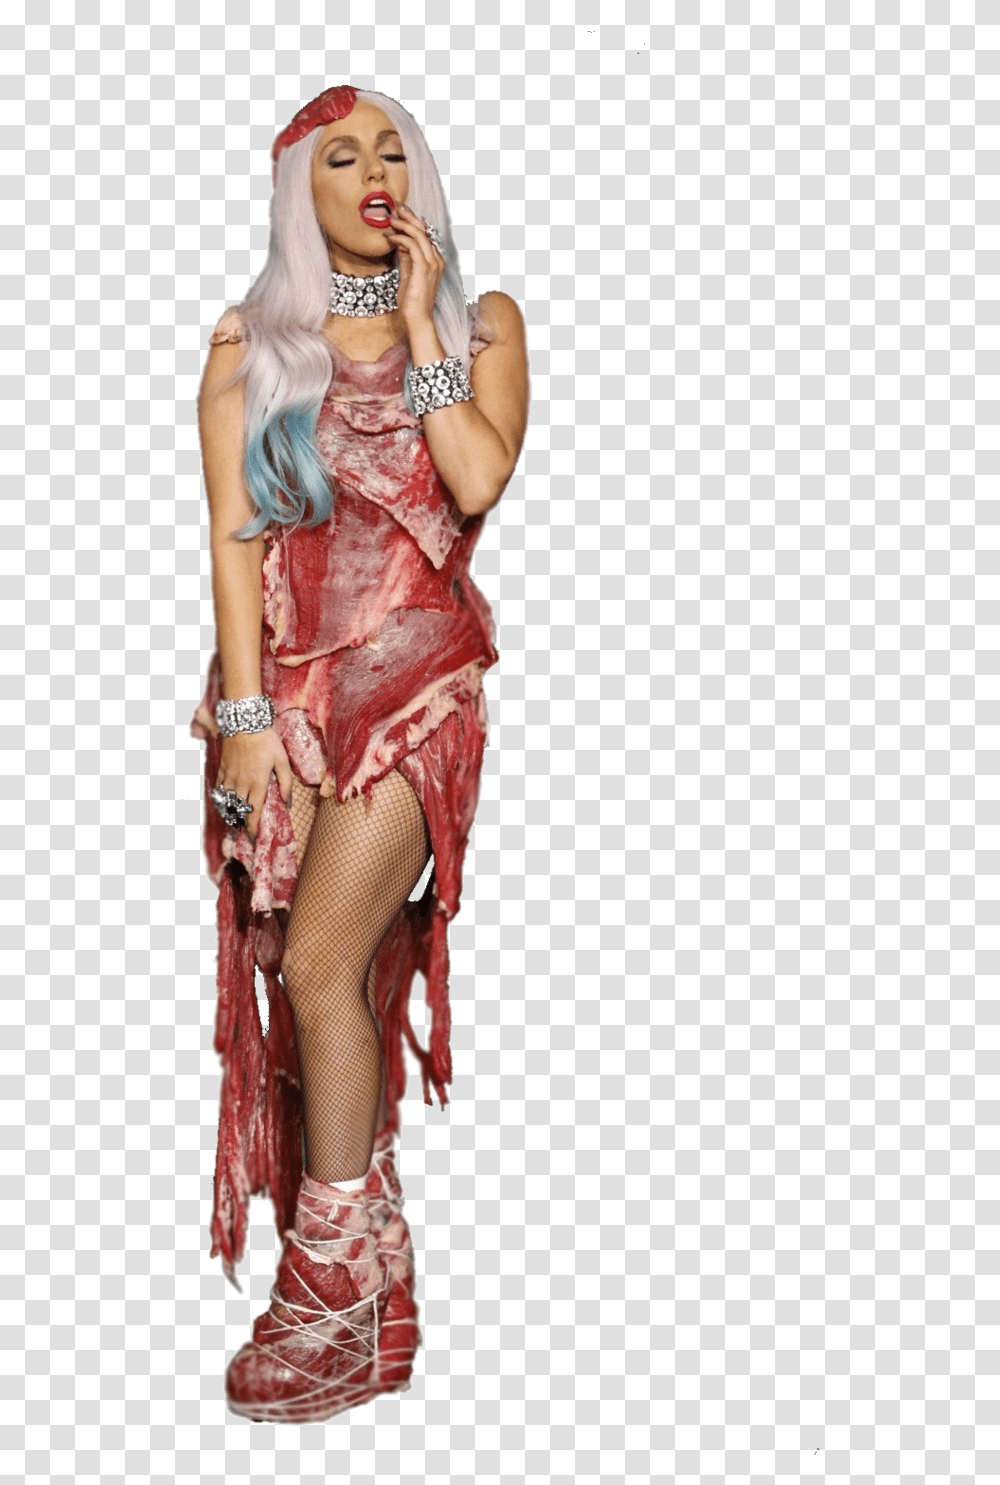 Lady Gaga Meat Dress By Heavyfallentears D4714bq Lady Gaga Meat Dress, Person, Leisure Activities, Performer Transparent Png